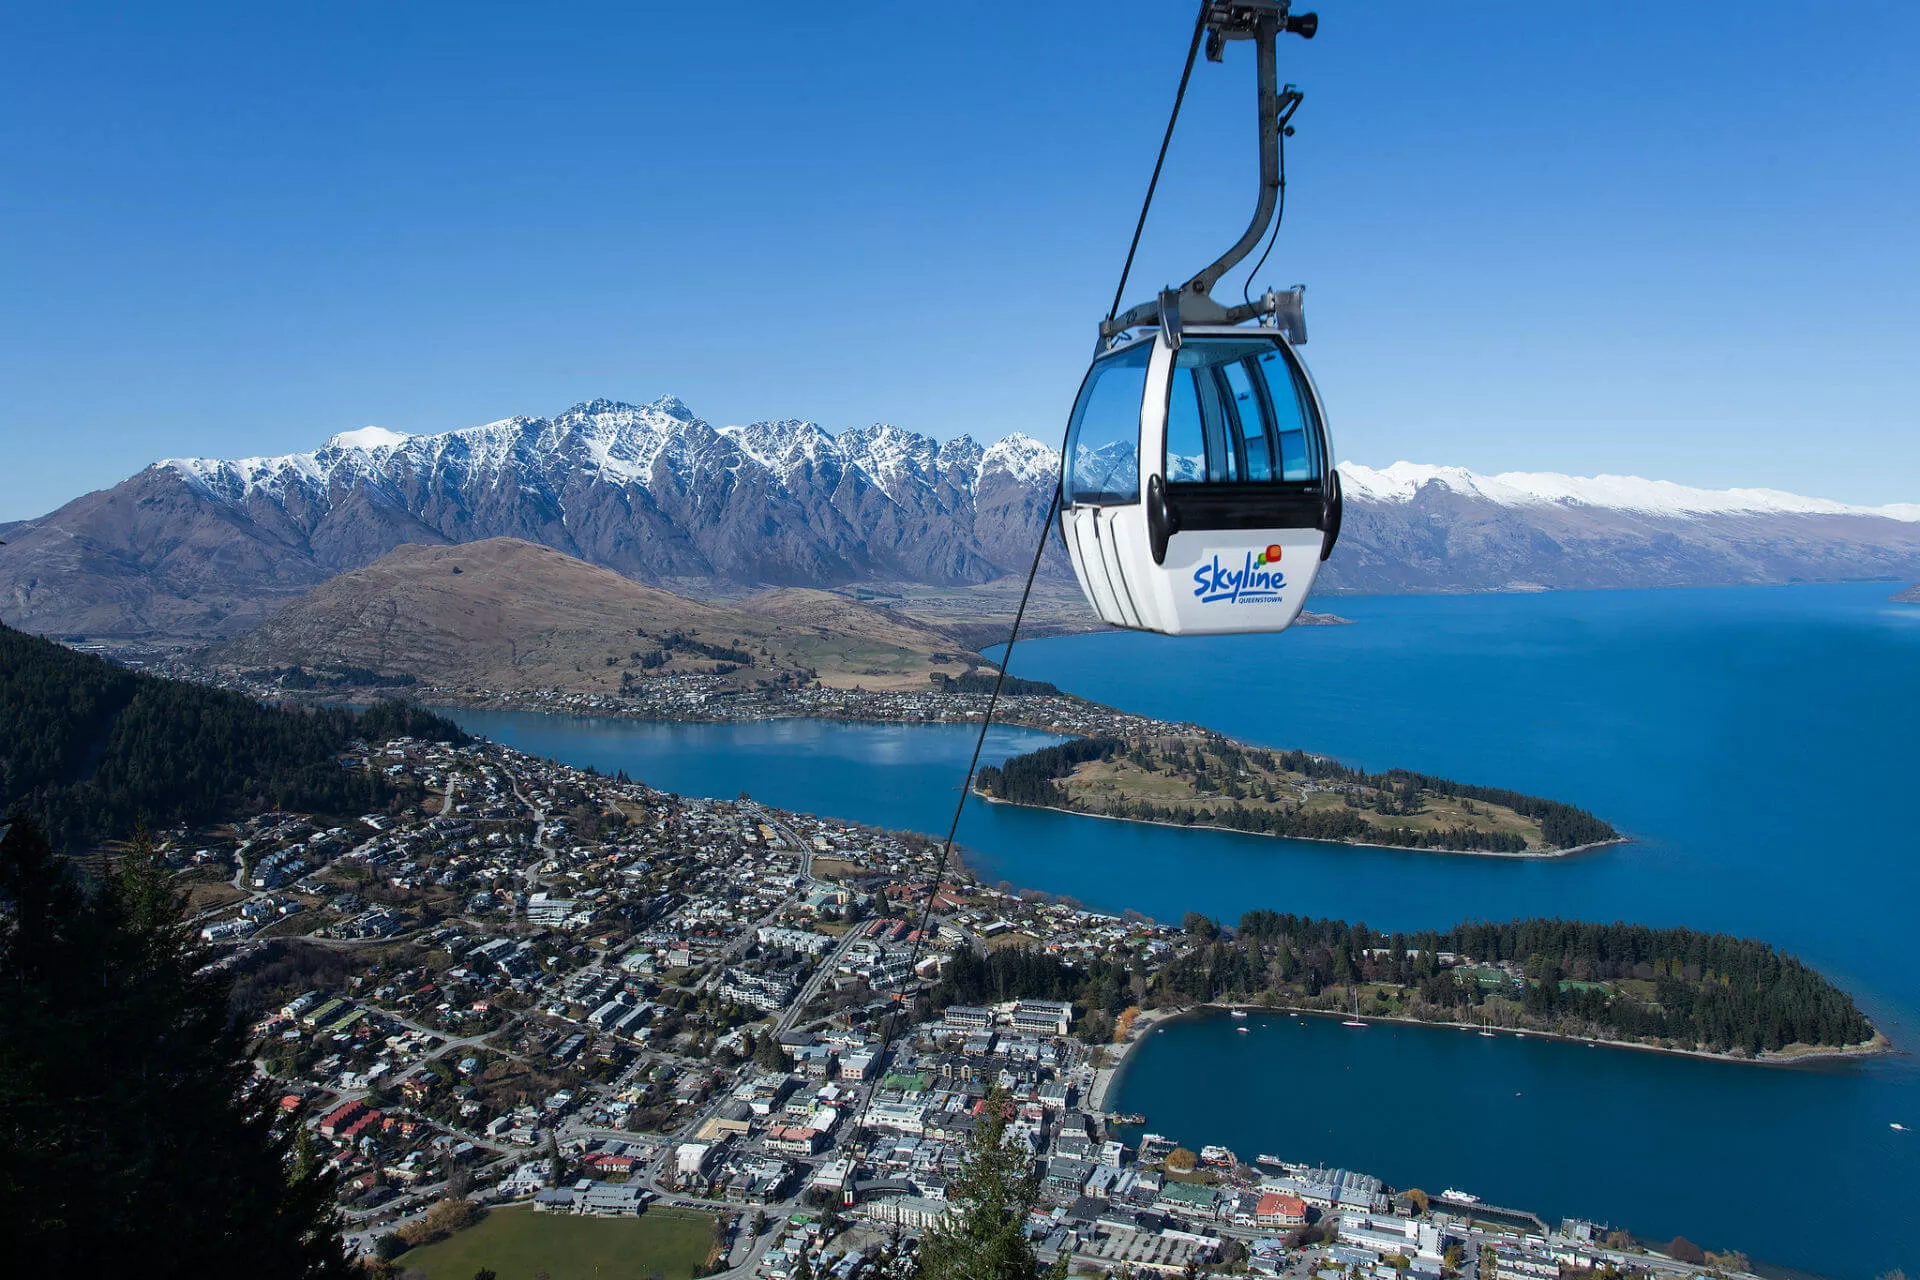 Skyline Queenstown in New Zealand, Australia and Oceania | Cable Cars - Rated 4.7